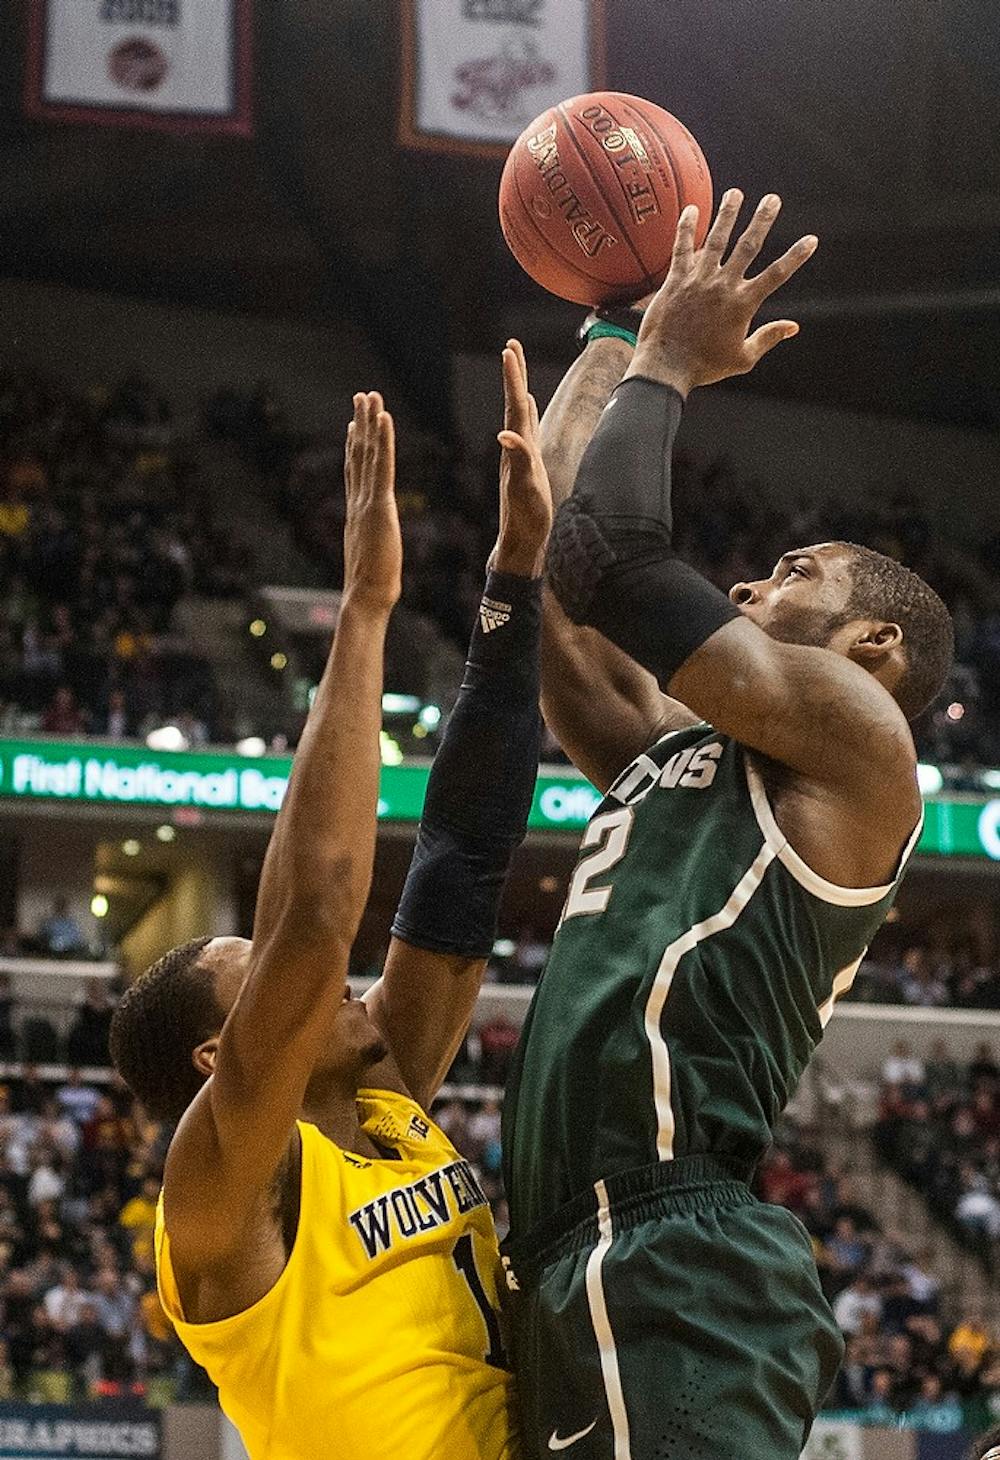 <p>Junior forward Branden Dawson attempts a point over Michigan forward Glenn Robinson III  March 16, 2014, during a game against Michigan at the Big 10 Championship at Bankers Life Fieldhouse in Indianapolis. The Spartans were beating the Wolverines at halftime, 38-29. Erin Hampton/The State News</p>